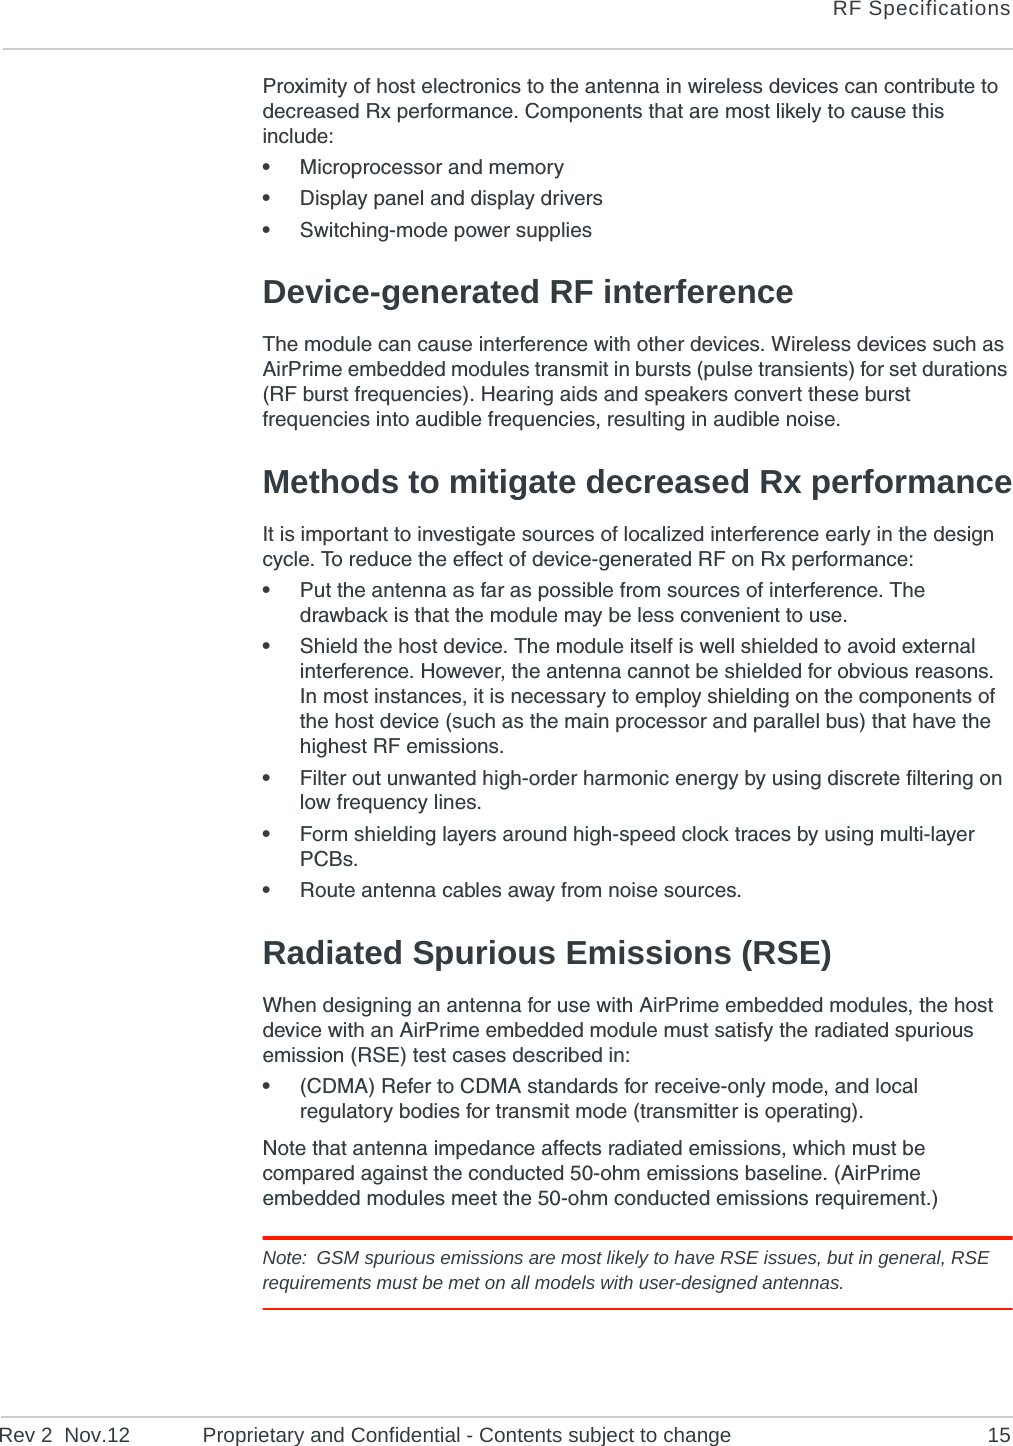 RF SpecificationsRev 2  Nov.12 Proprietary and Confidential - Contents subject to change 15Proximity of host electronics to the antenna in wireless devices can contribute to decreased Rx performance. Components that are most likely to cause this include:•Microprocessor and memory•Display panel and display drivers•Switching-mode power suppliesDevice-generated RF interferenceThe module can cause interference with other devices. Wireless devices such as AirPrime embedded modules transmit in bursts (pulse transients) for set durations (RF burst frequencies). Hearing aids and speakers convert these burst frequencies into audible frequencies, resulting in audible noise. Methods to mitigate decreased Rx performanceIt is important to investigate sources of localized interference early in the design cycle. To reduce the effect of device-generated RF on Rx performance:•Put the antenna as far as possible from sources of interference. The drawback is that the module may be less convenient to use.•Shield the host device. The module itself is well shielded to avoid external interference. However, the antenna cannot be shielded for obvious reasons. In most instances, it is necessary to employ shielding on the components of the host device (such as the main processor and parallel bus) that have the highest RF emissions. •Filter out unwanted high-order harmonic energy by using discrete filtering on low frequency lines.•Form shielding layers around high-speed clock traces by using multi-layer PCBs.•Route antenna cables away from noise sources.Radiated Spurious Emissions (RSE)When designing an antenna for use with AirPrime embedded modules, the host device with an AirPrime embedded module must satisfy the radiated spurious emission (RSE) test cases described in:•(CDMA) Refer to CDMA standards for receive-only mode, and local regulatory bodies for transmit mode (transmitter is operating).Note that antenna impedance affects radiated emissions, which must be compared against the conducted 50-ohm emissions baseline. (AirPrime embedded modules meet the 50-ohm conducted emissions requirement.)Note: GSM spurious emissions are most likely to have RSE issues, but in general, RSE requirements must be met on all models with user-designed antennas.